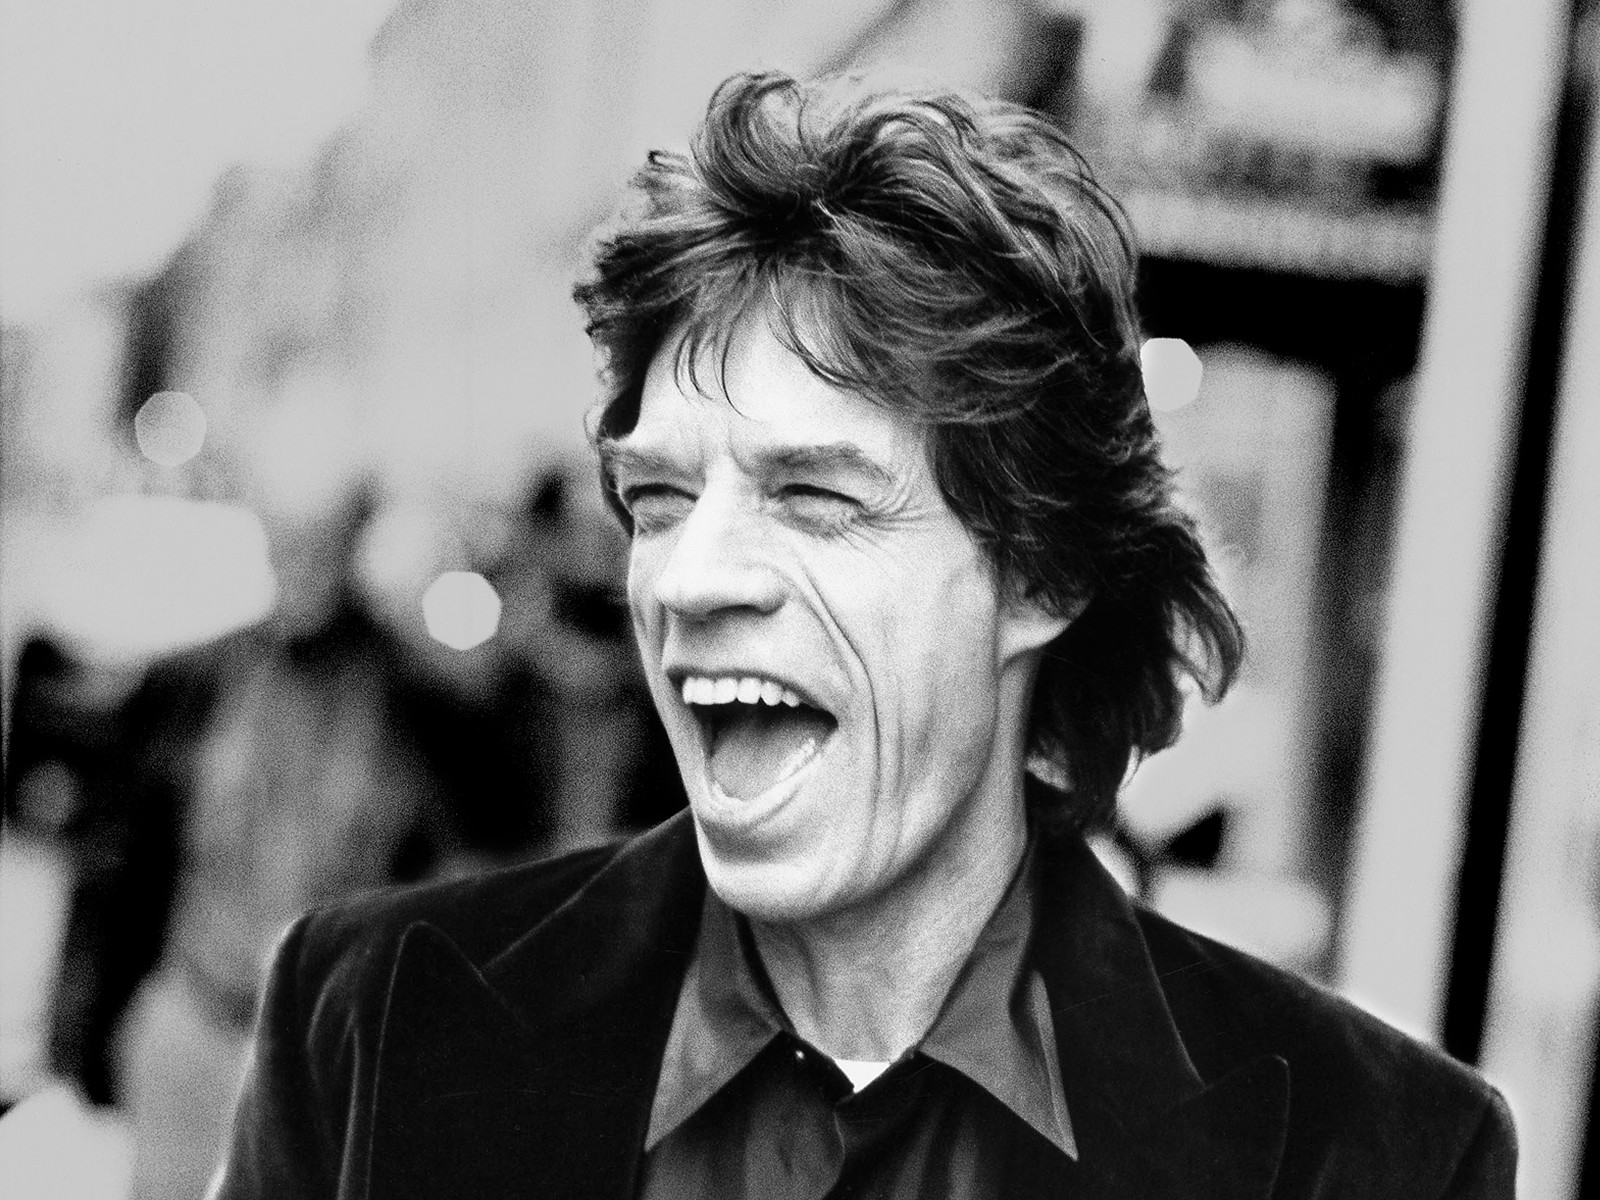 Mick Jagger, another AB- legend.